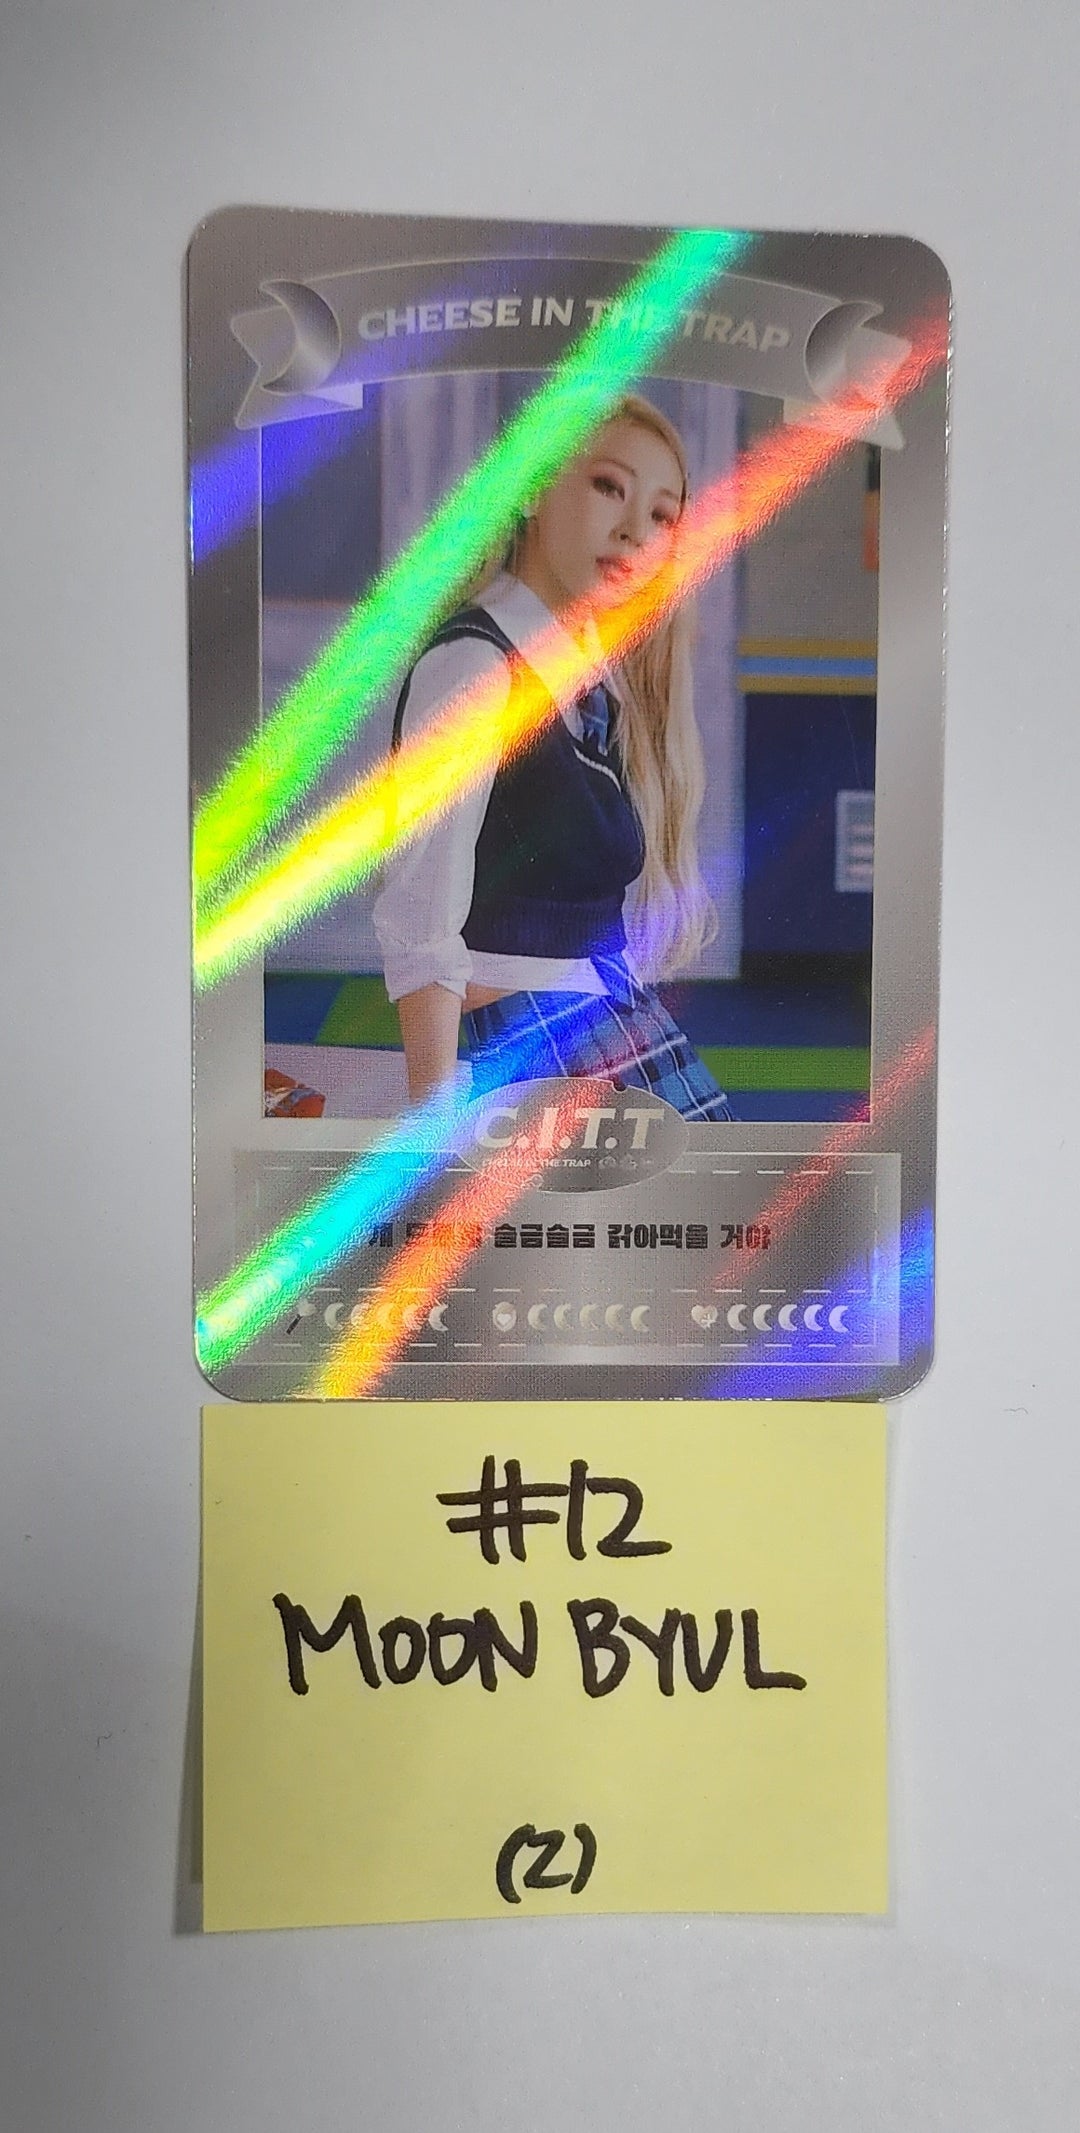 Moon Byul (Of Mamamoo) "C.I.T.T (Cheese in the Trap)" - Official Photocard